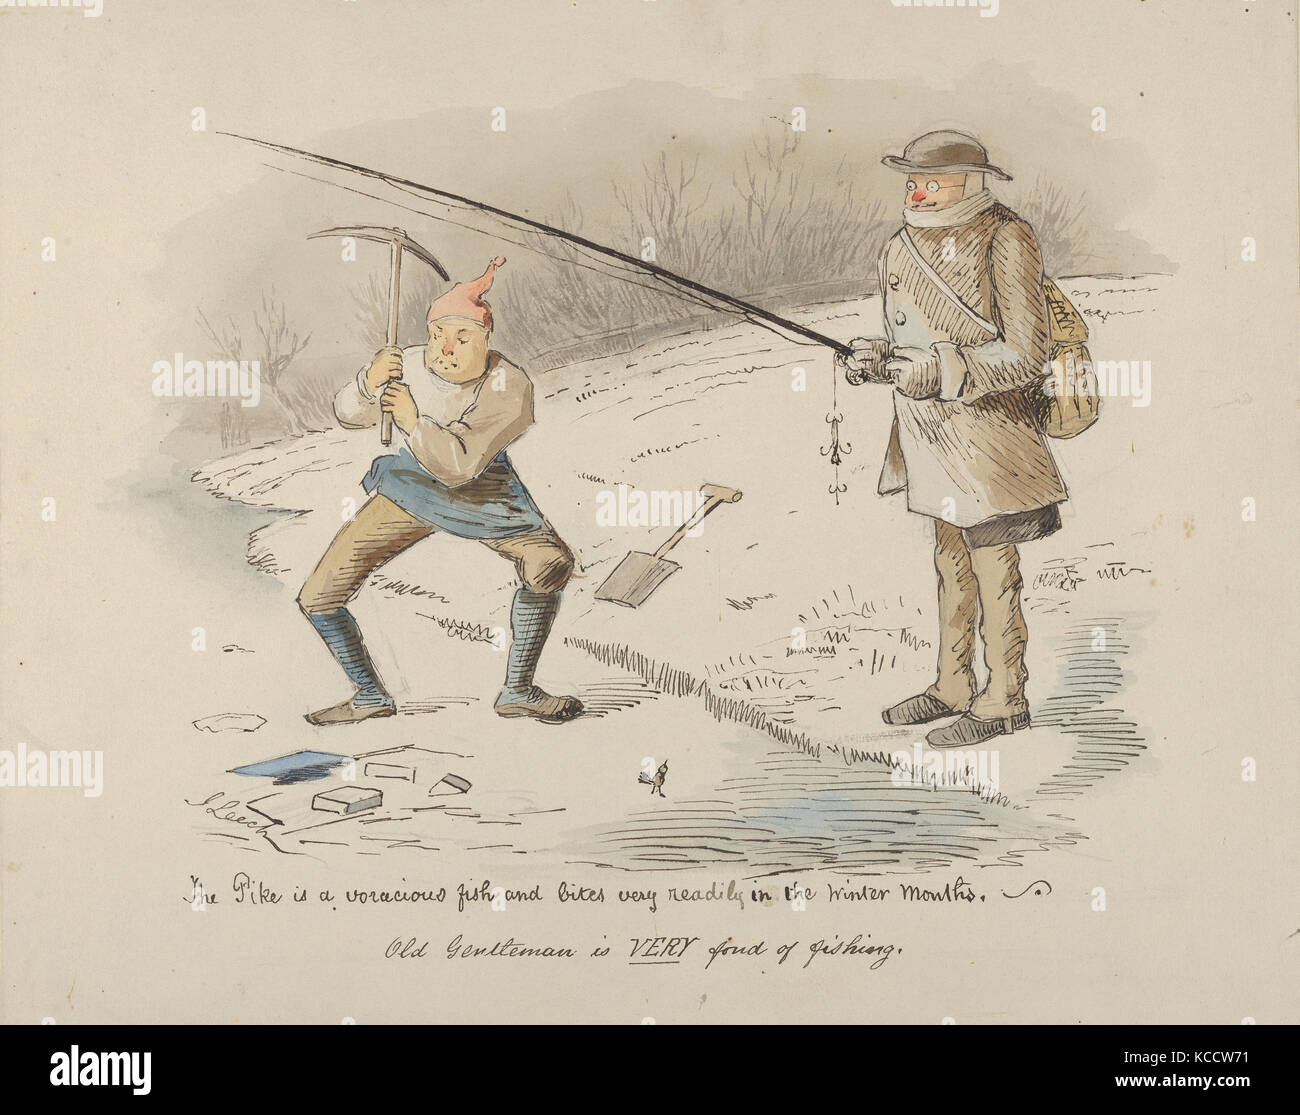 The Pike is a voracious fish and bites readily in the Winter months–Old Gentleman is VERY fond of fishing, John Leech, 1830–64 Stock Photo